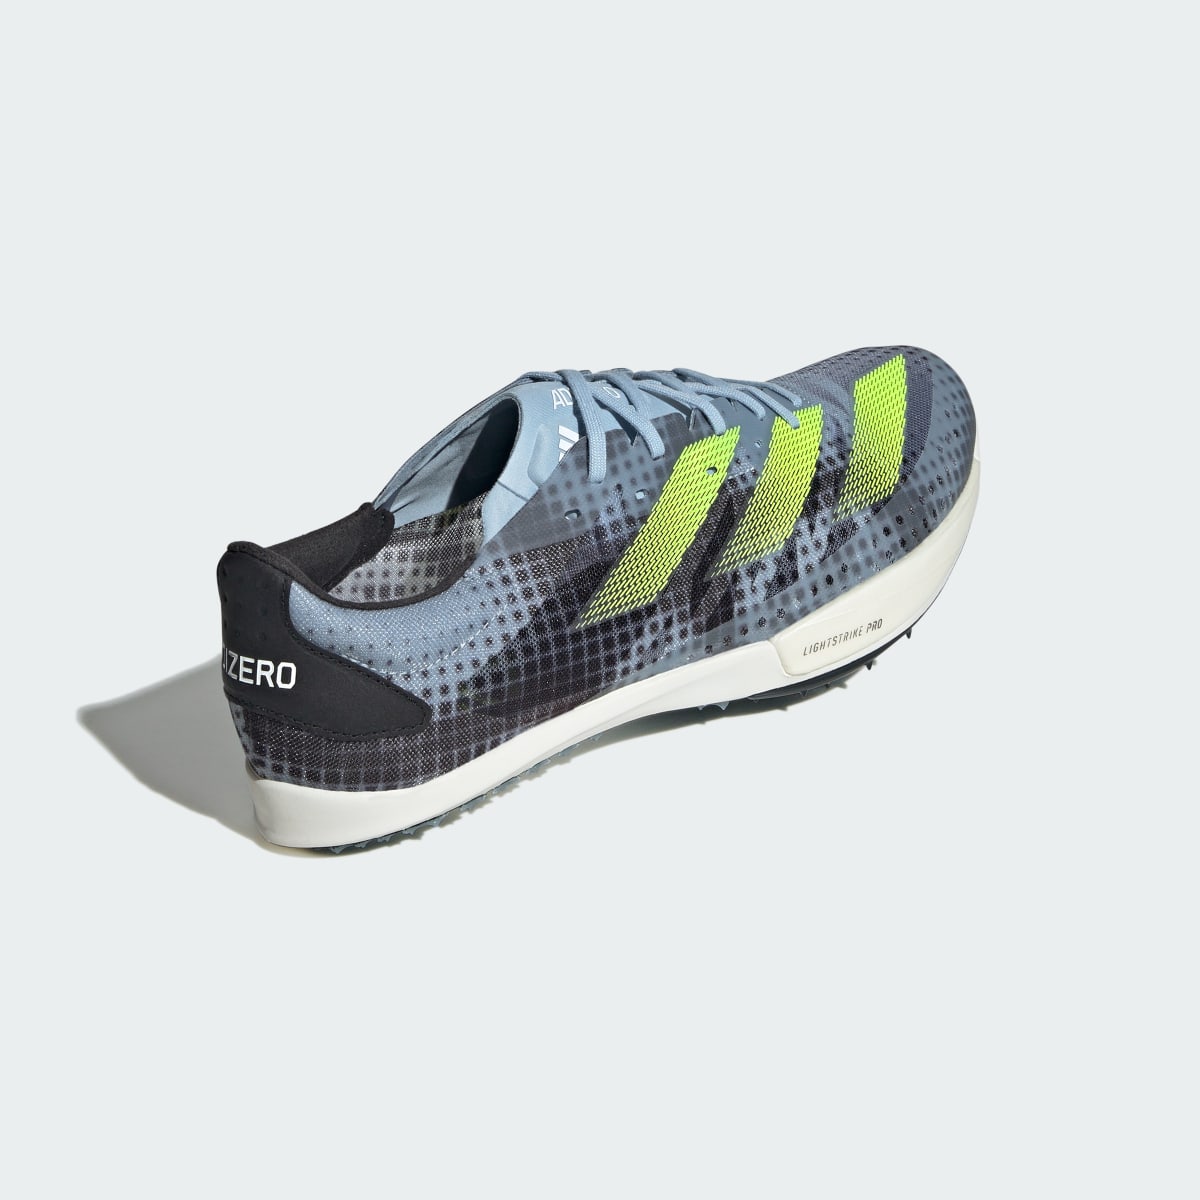 Adidas Adizero Ambition Track and Field Lightstrike Shoes. 6